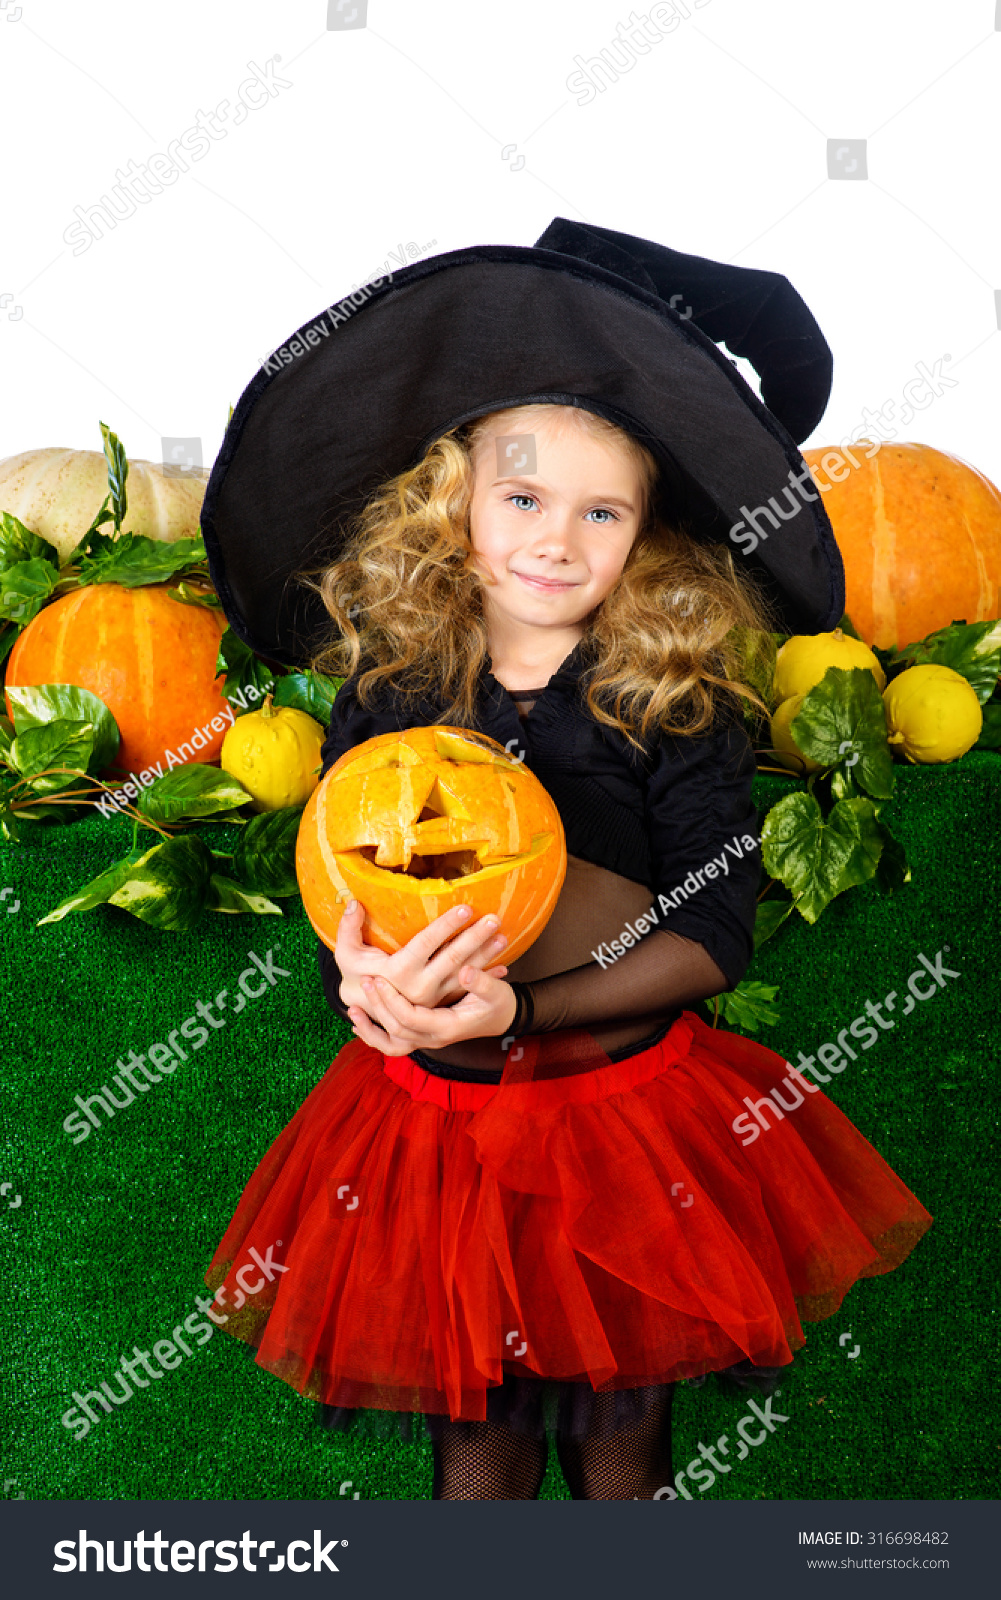 Cute Little Girl Witch Costume Posing Stock Photo 316698482 | Shutterstock